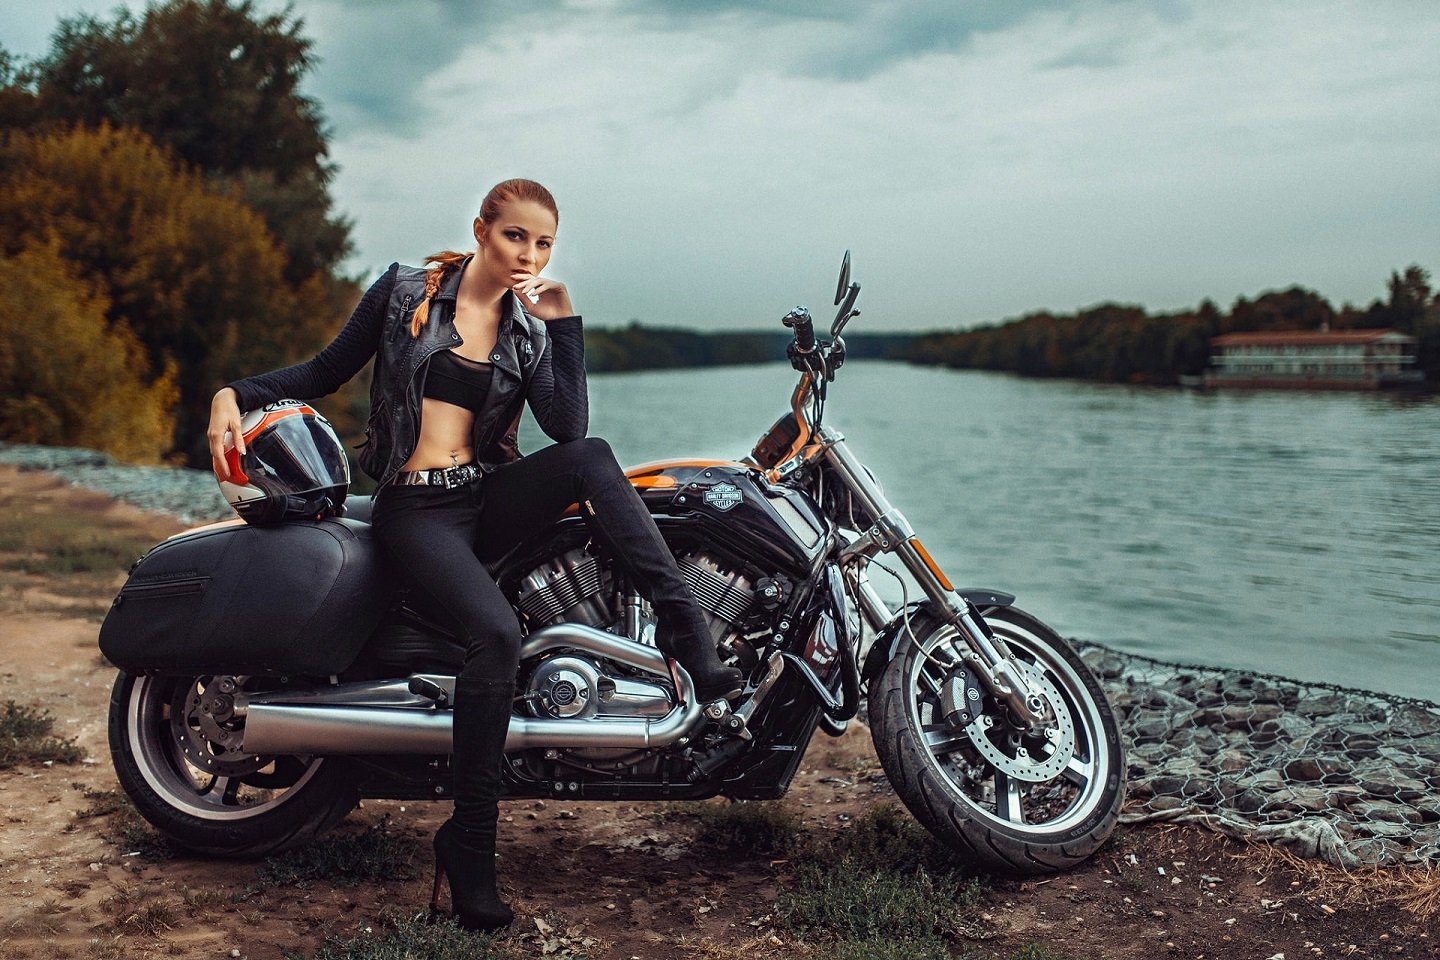 Harley Davidson Wallpaper and Background Image | 1440x960 | ID:541928